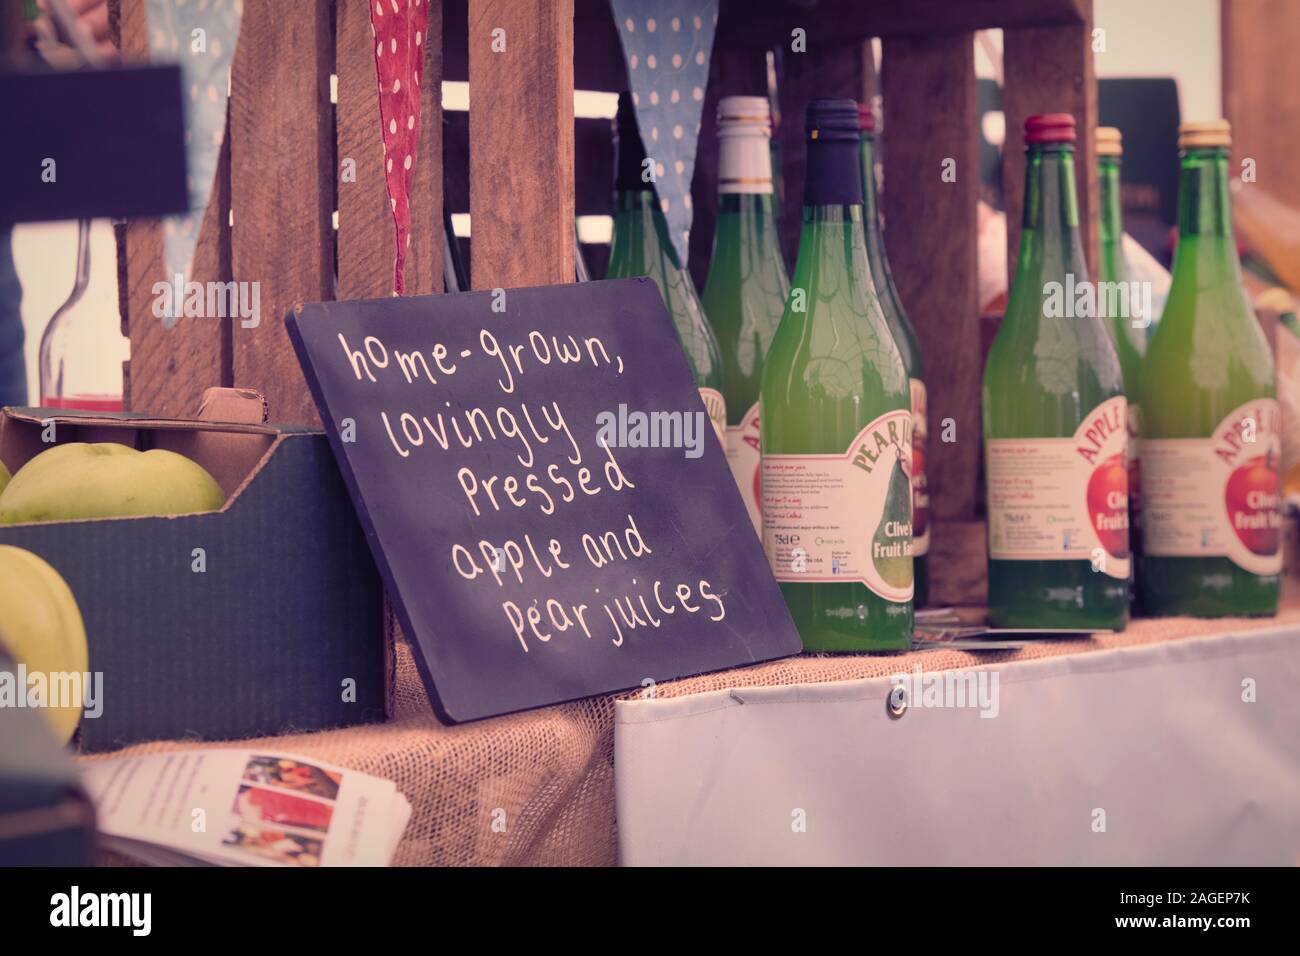 Home grown pear and apple juice sign on a display. UK. Vintage filter applied Stock Photo